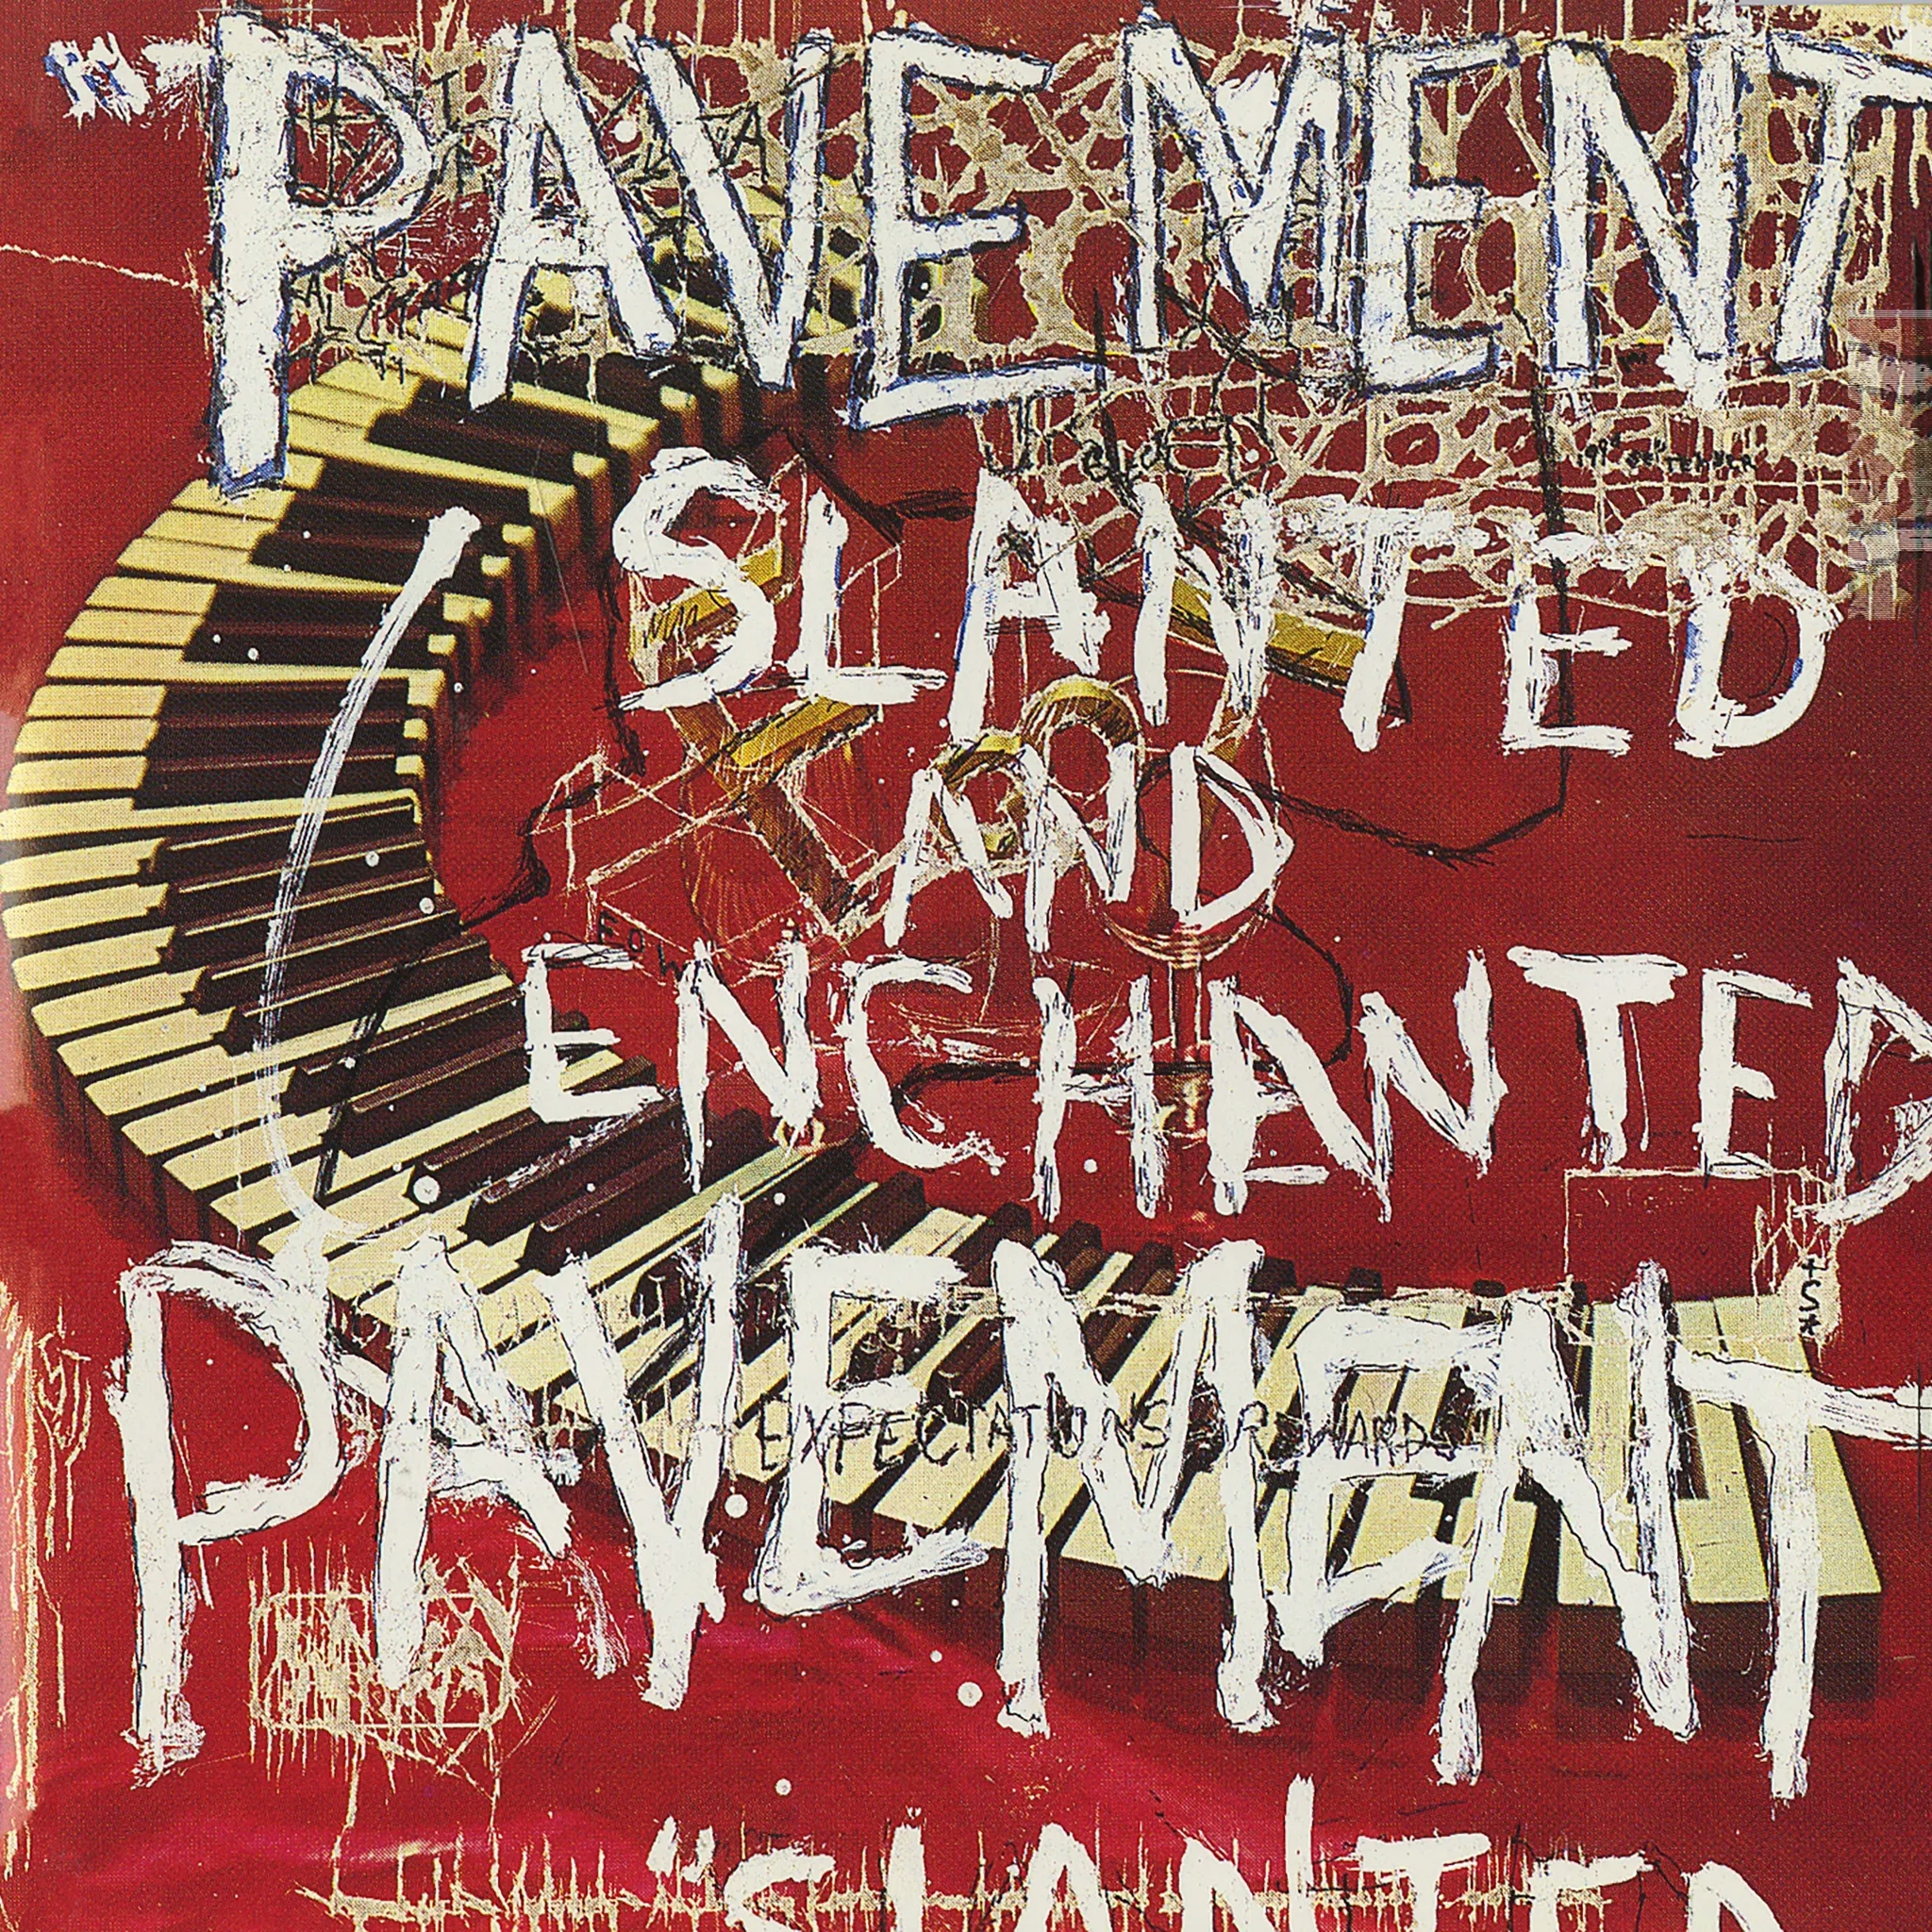 Album artwork for Slanted and Enchanted - 30th Anniversary by Pavement